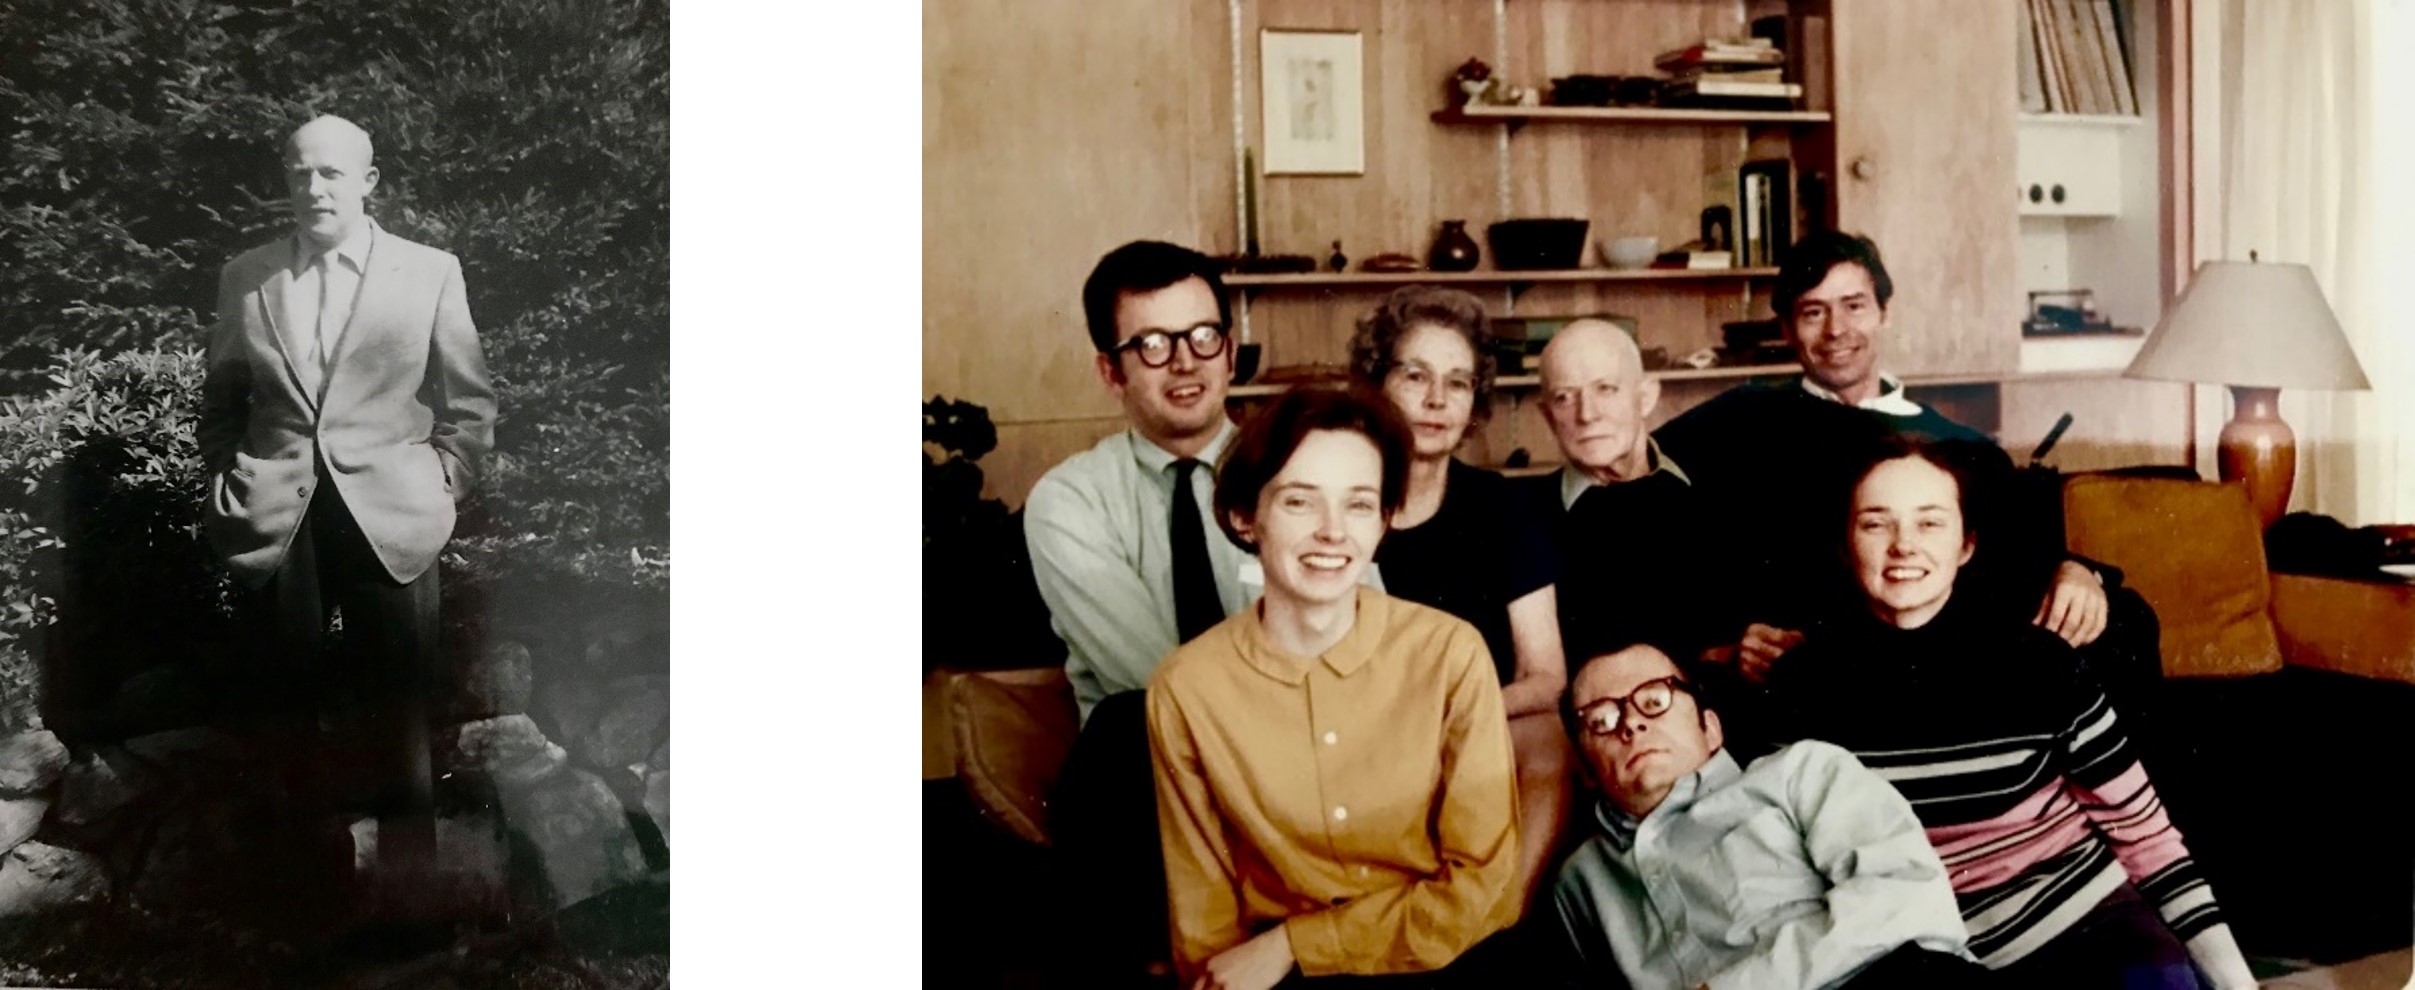 Images of Harry Hoover and his family